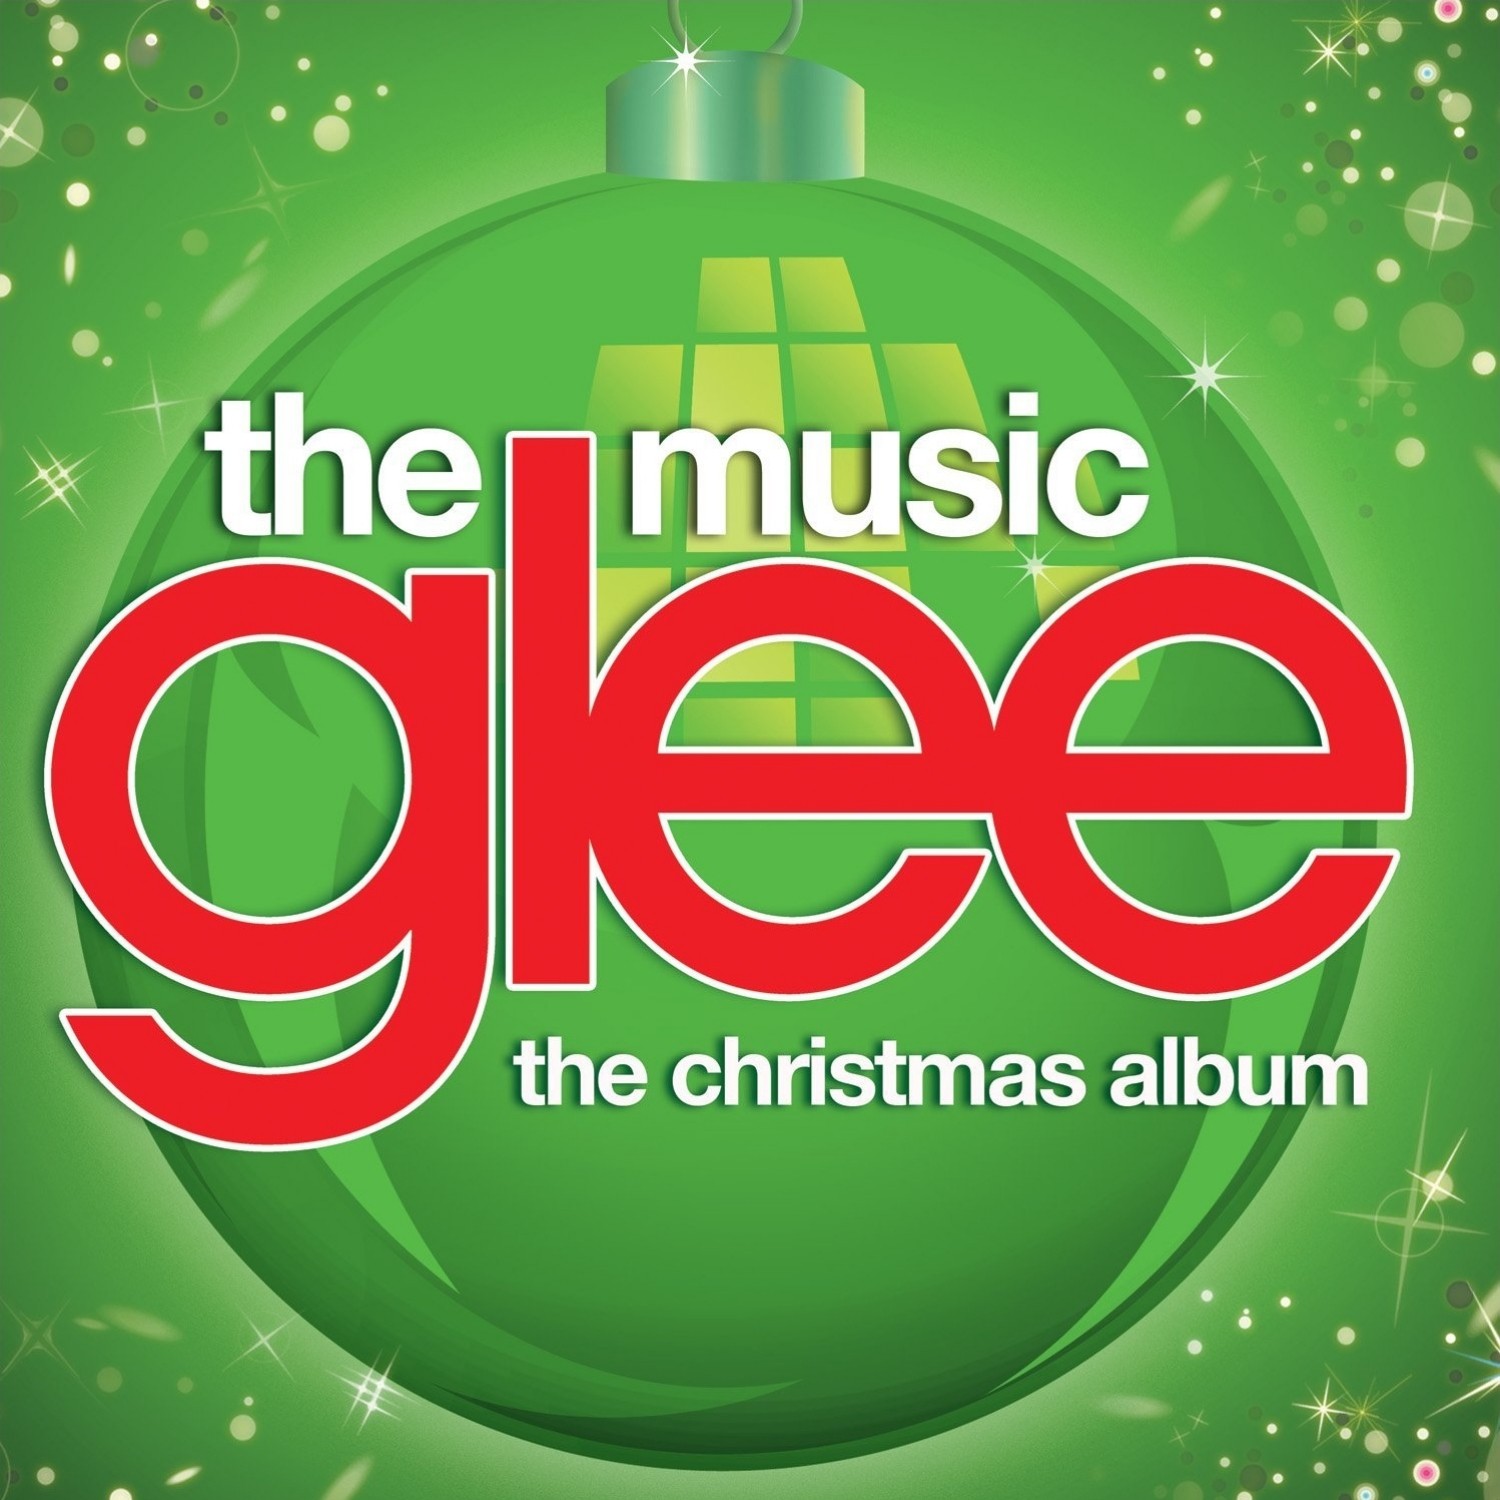 Glee: The Music, Volume 6 by Glee Cast on Amazon Music